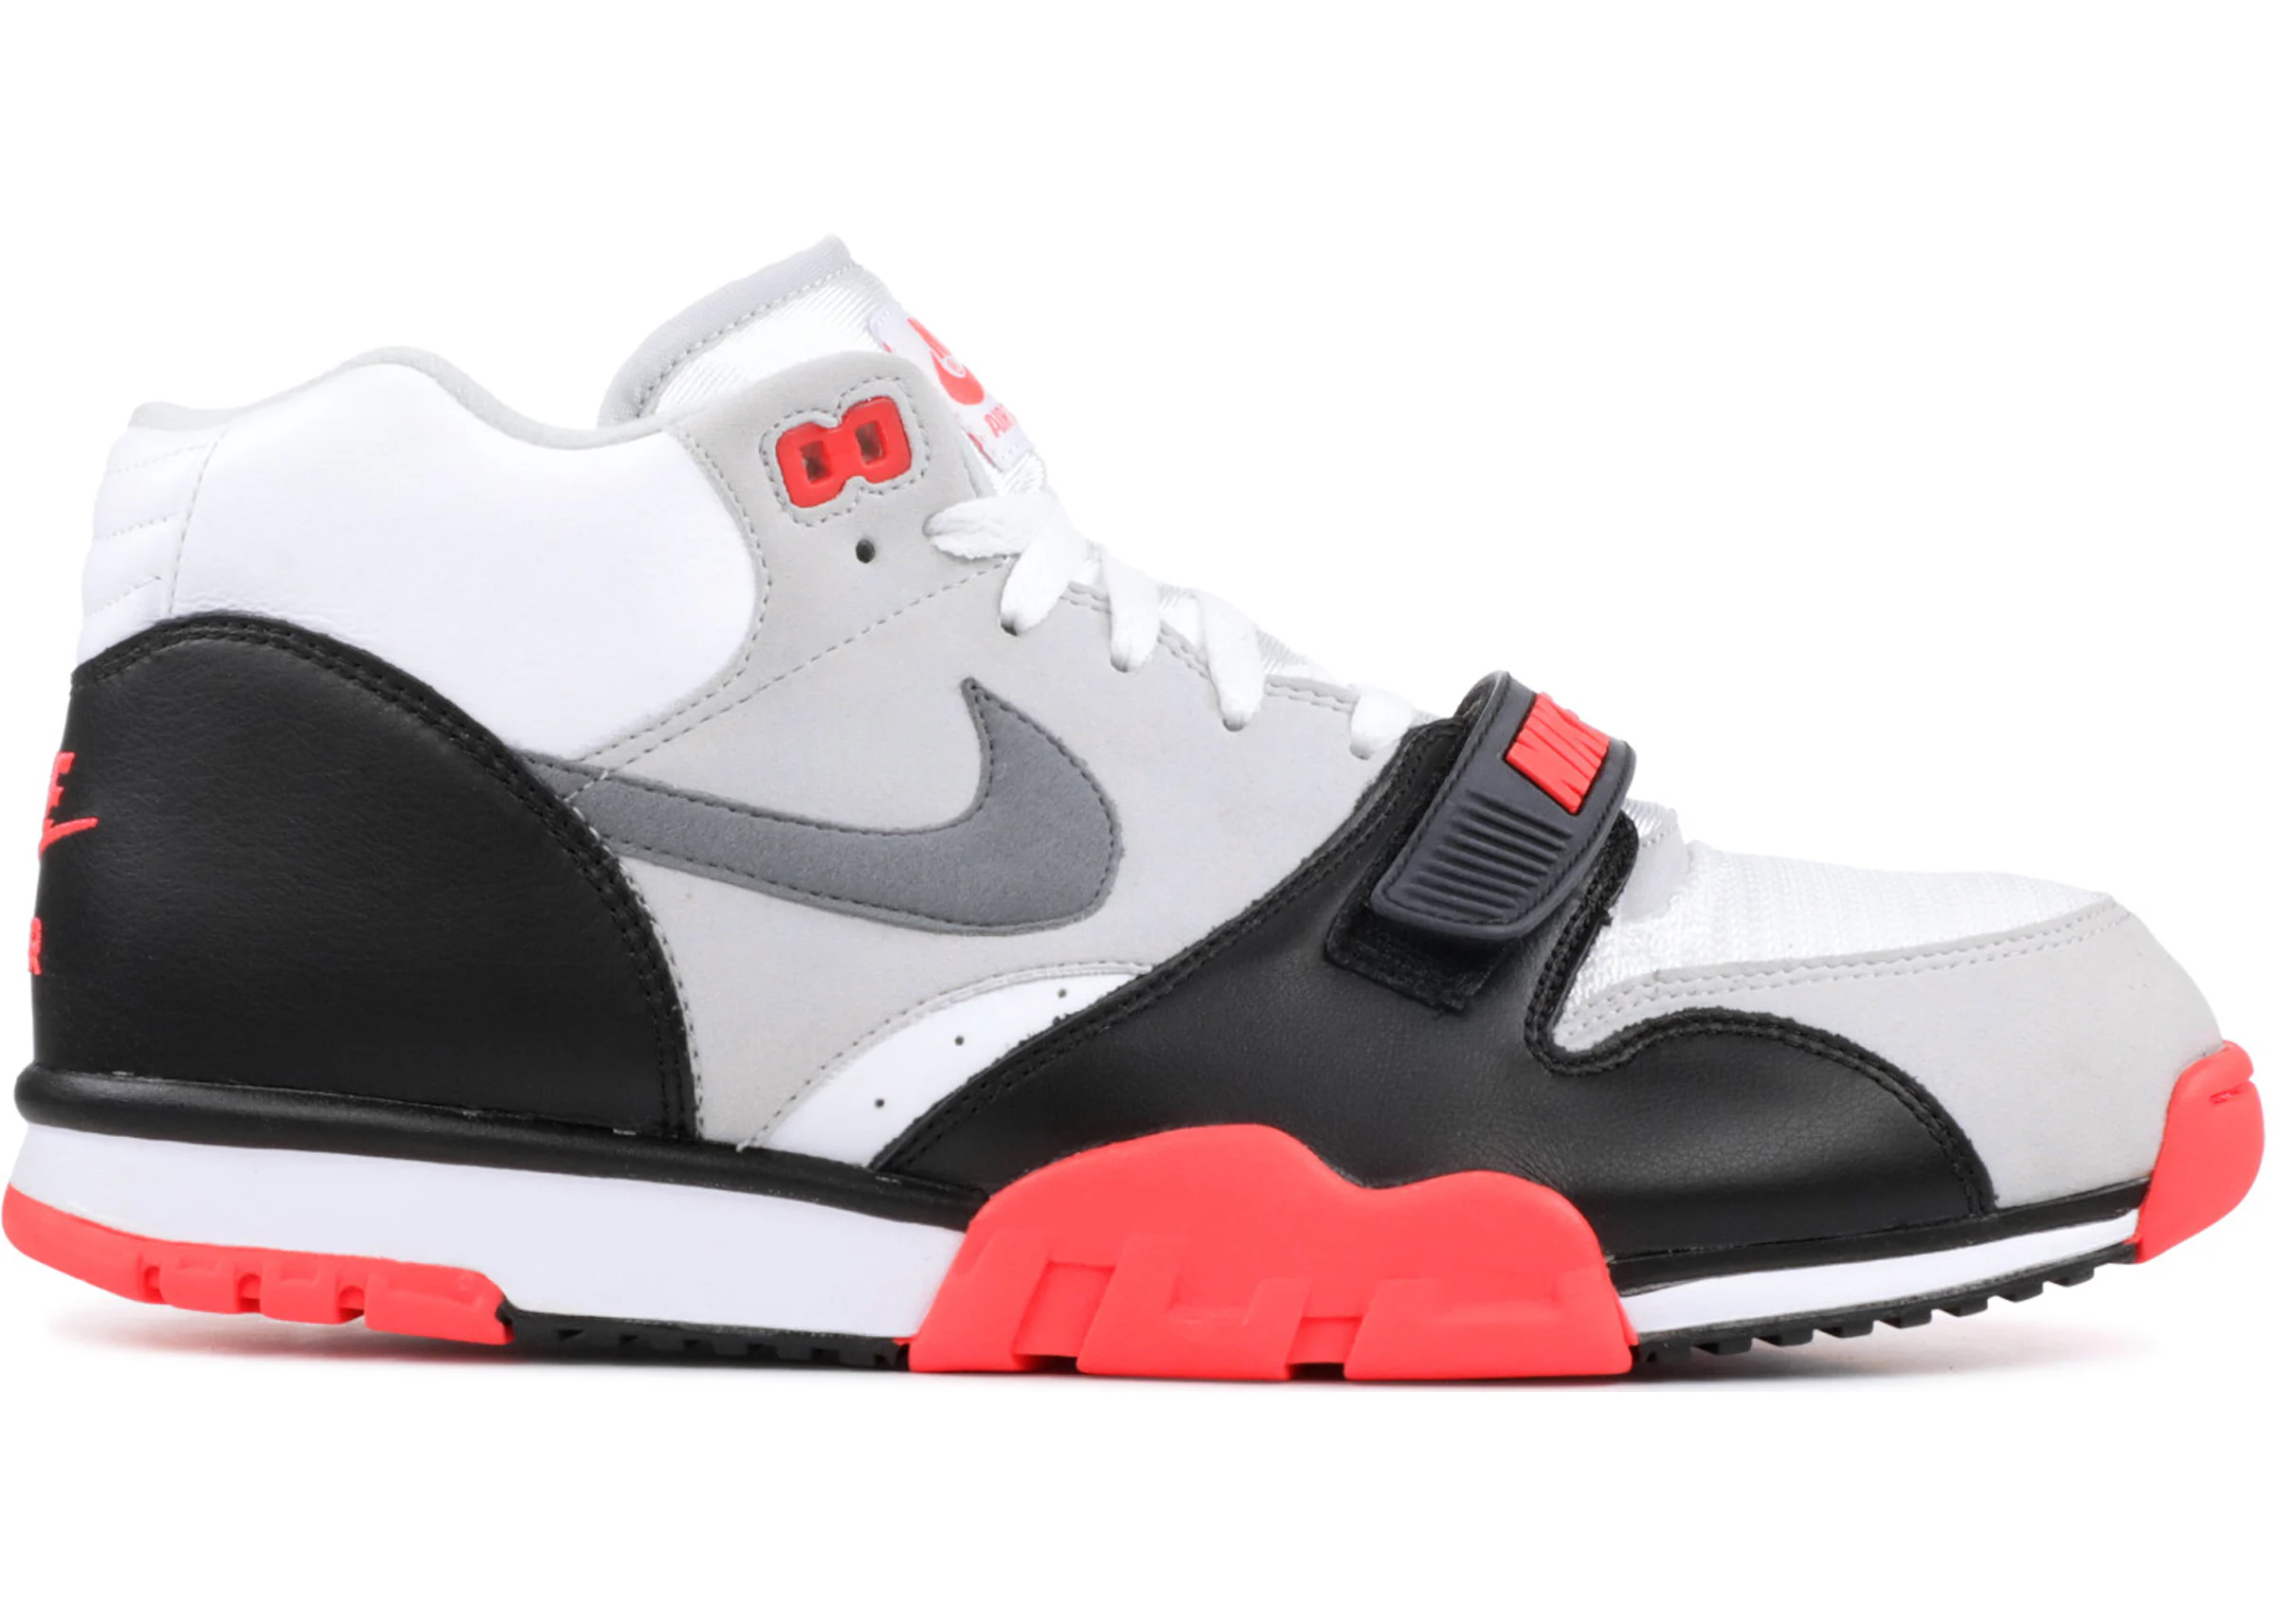 Nike Air Trainer 1 Mid Infrared Men's - 607081-100 - US